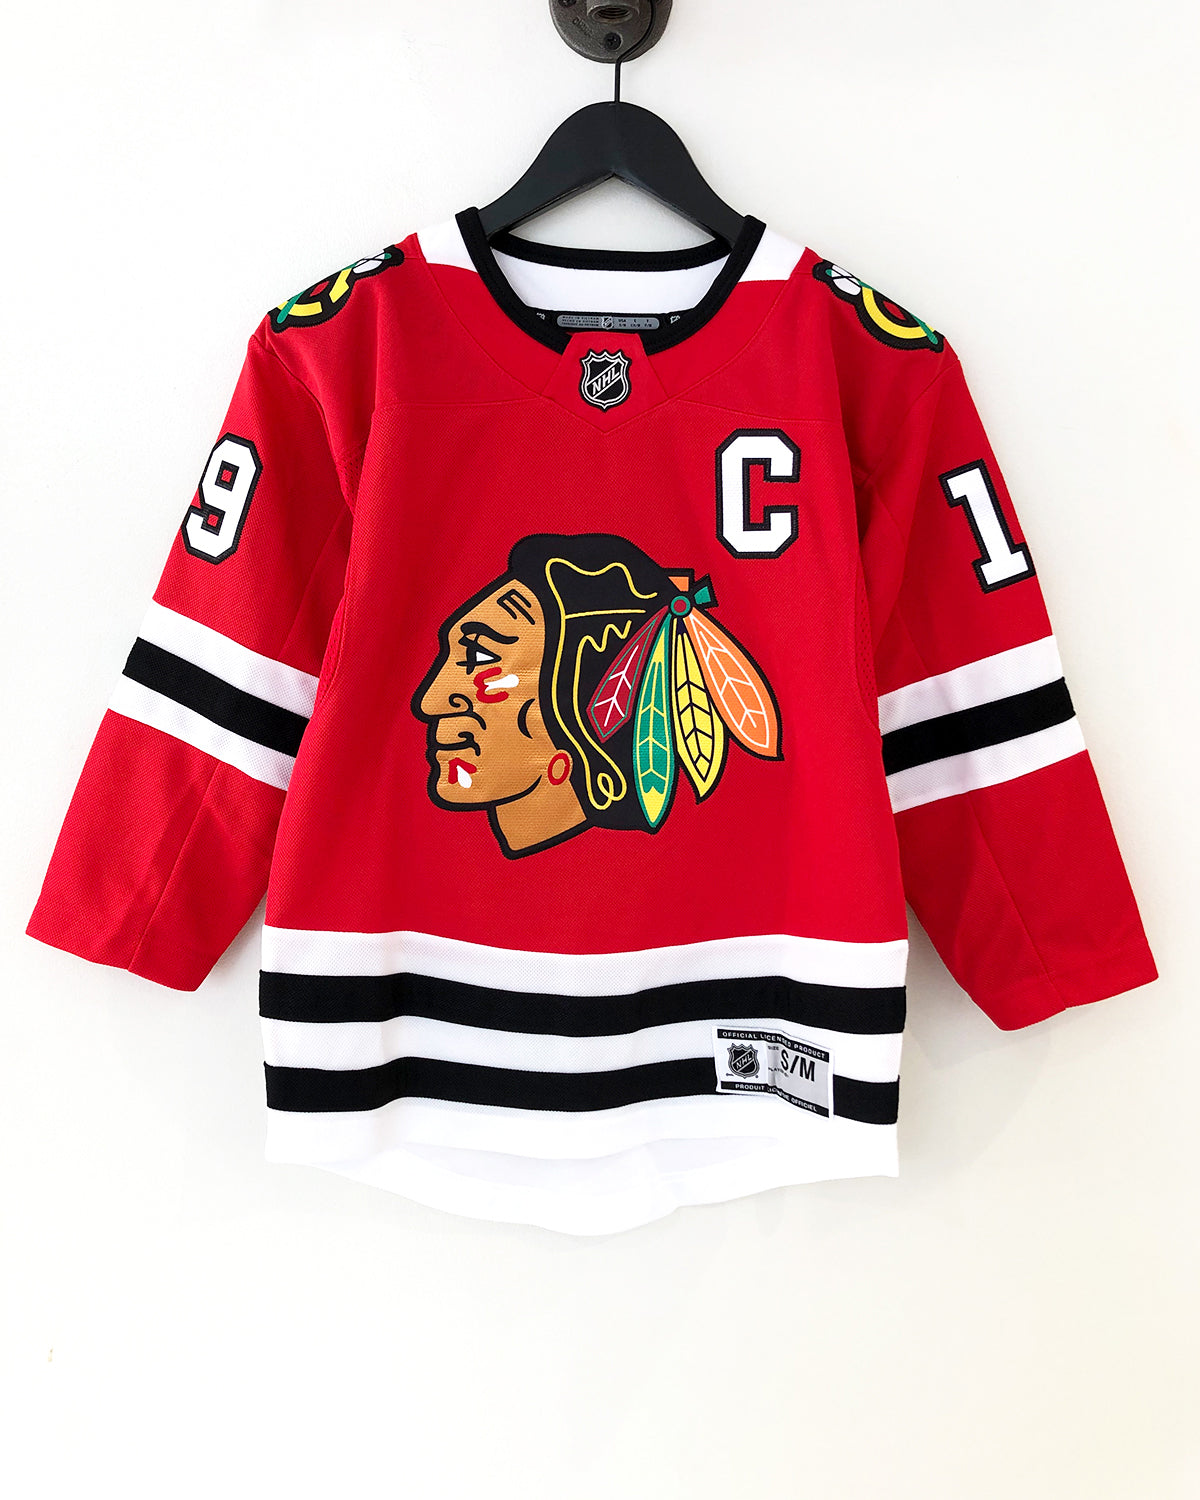 Outerstuff Infant Chicago Blackhawks Jonathan Toews Home Jersey